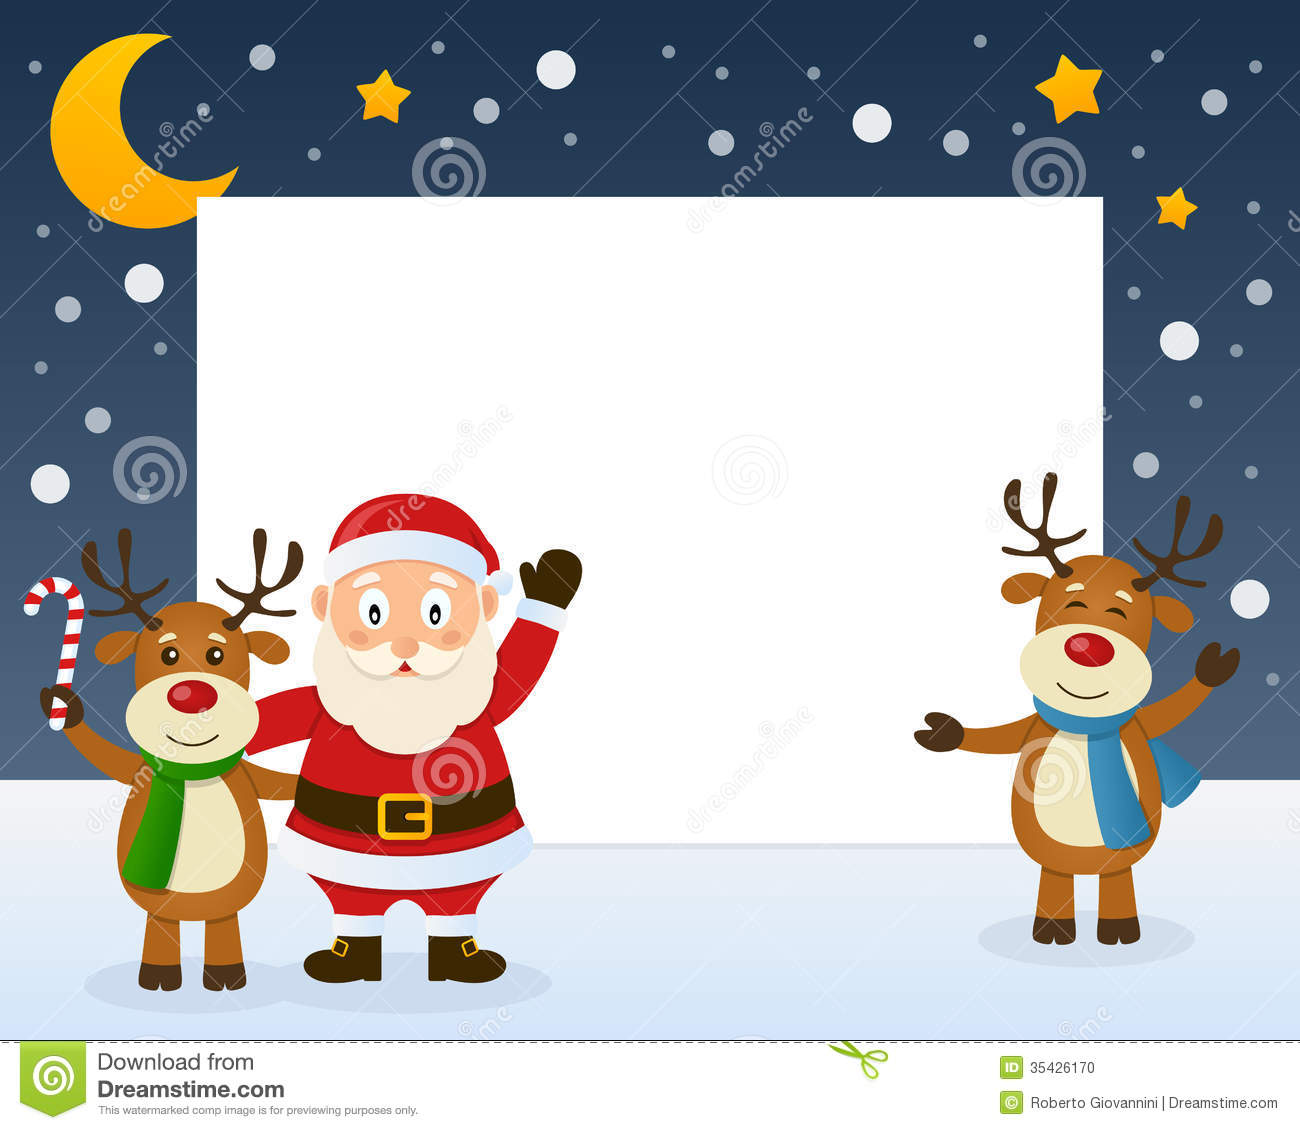     Santa Claus Character And Two Cute Reindeer On The Snow  Eps File